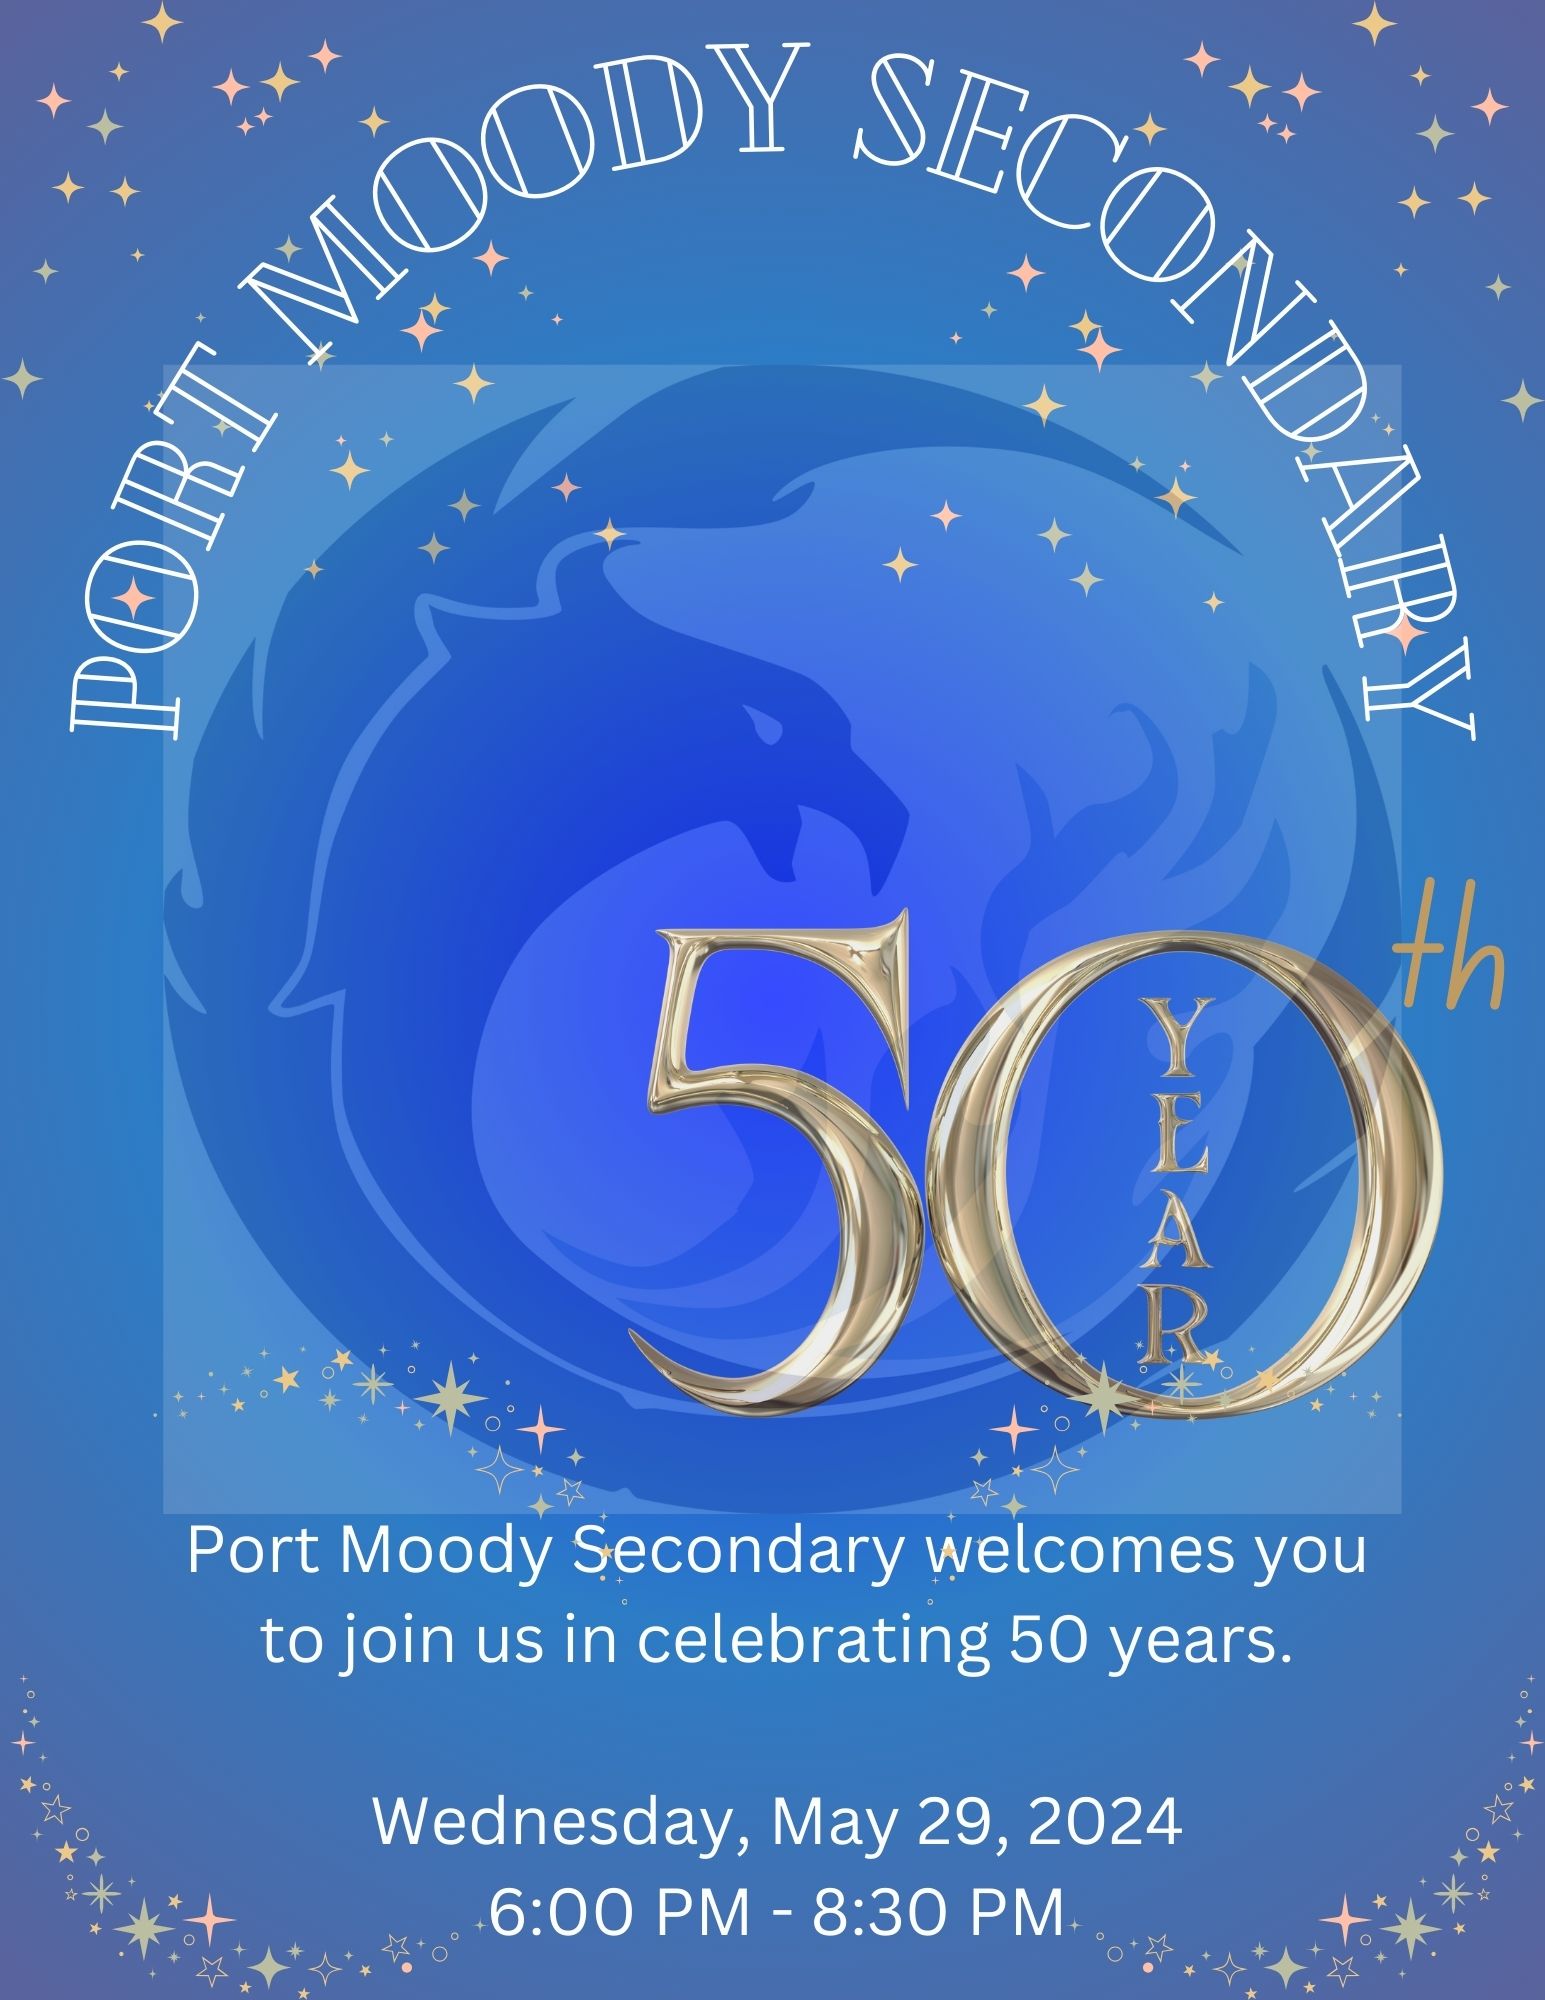 Port Moody Secondary welcomes you to join us in celebrating 50 years.                                                                                              Wednesday, May 29, 2024 (6pm - 8:30pm)